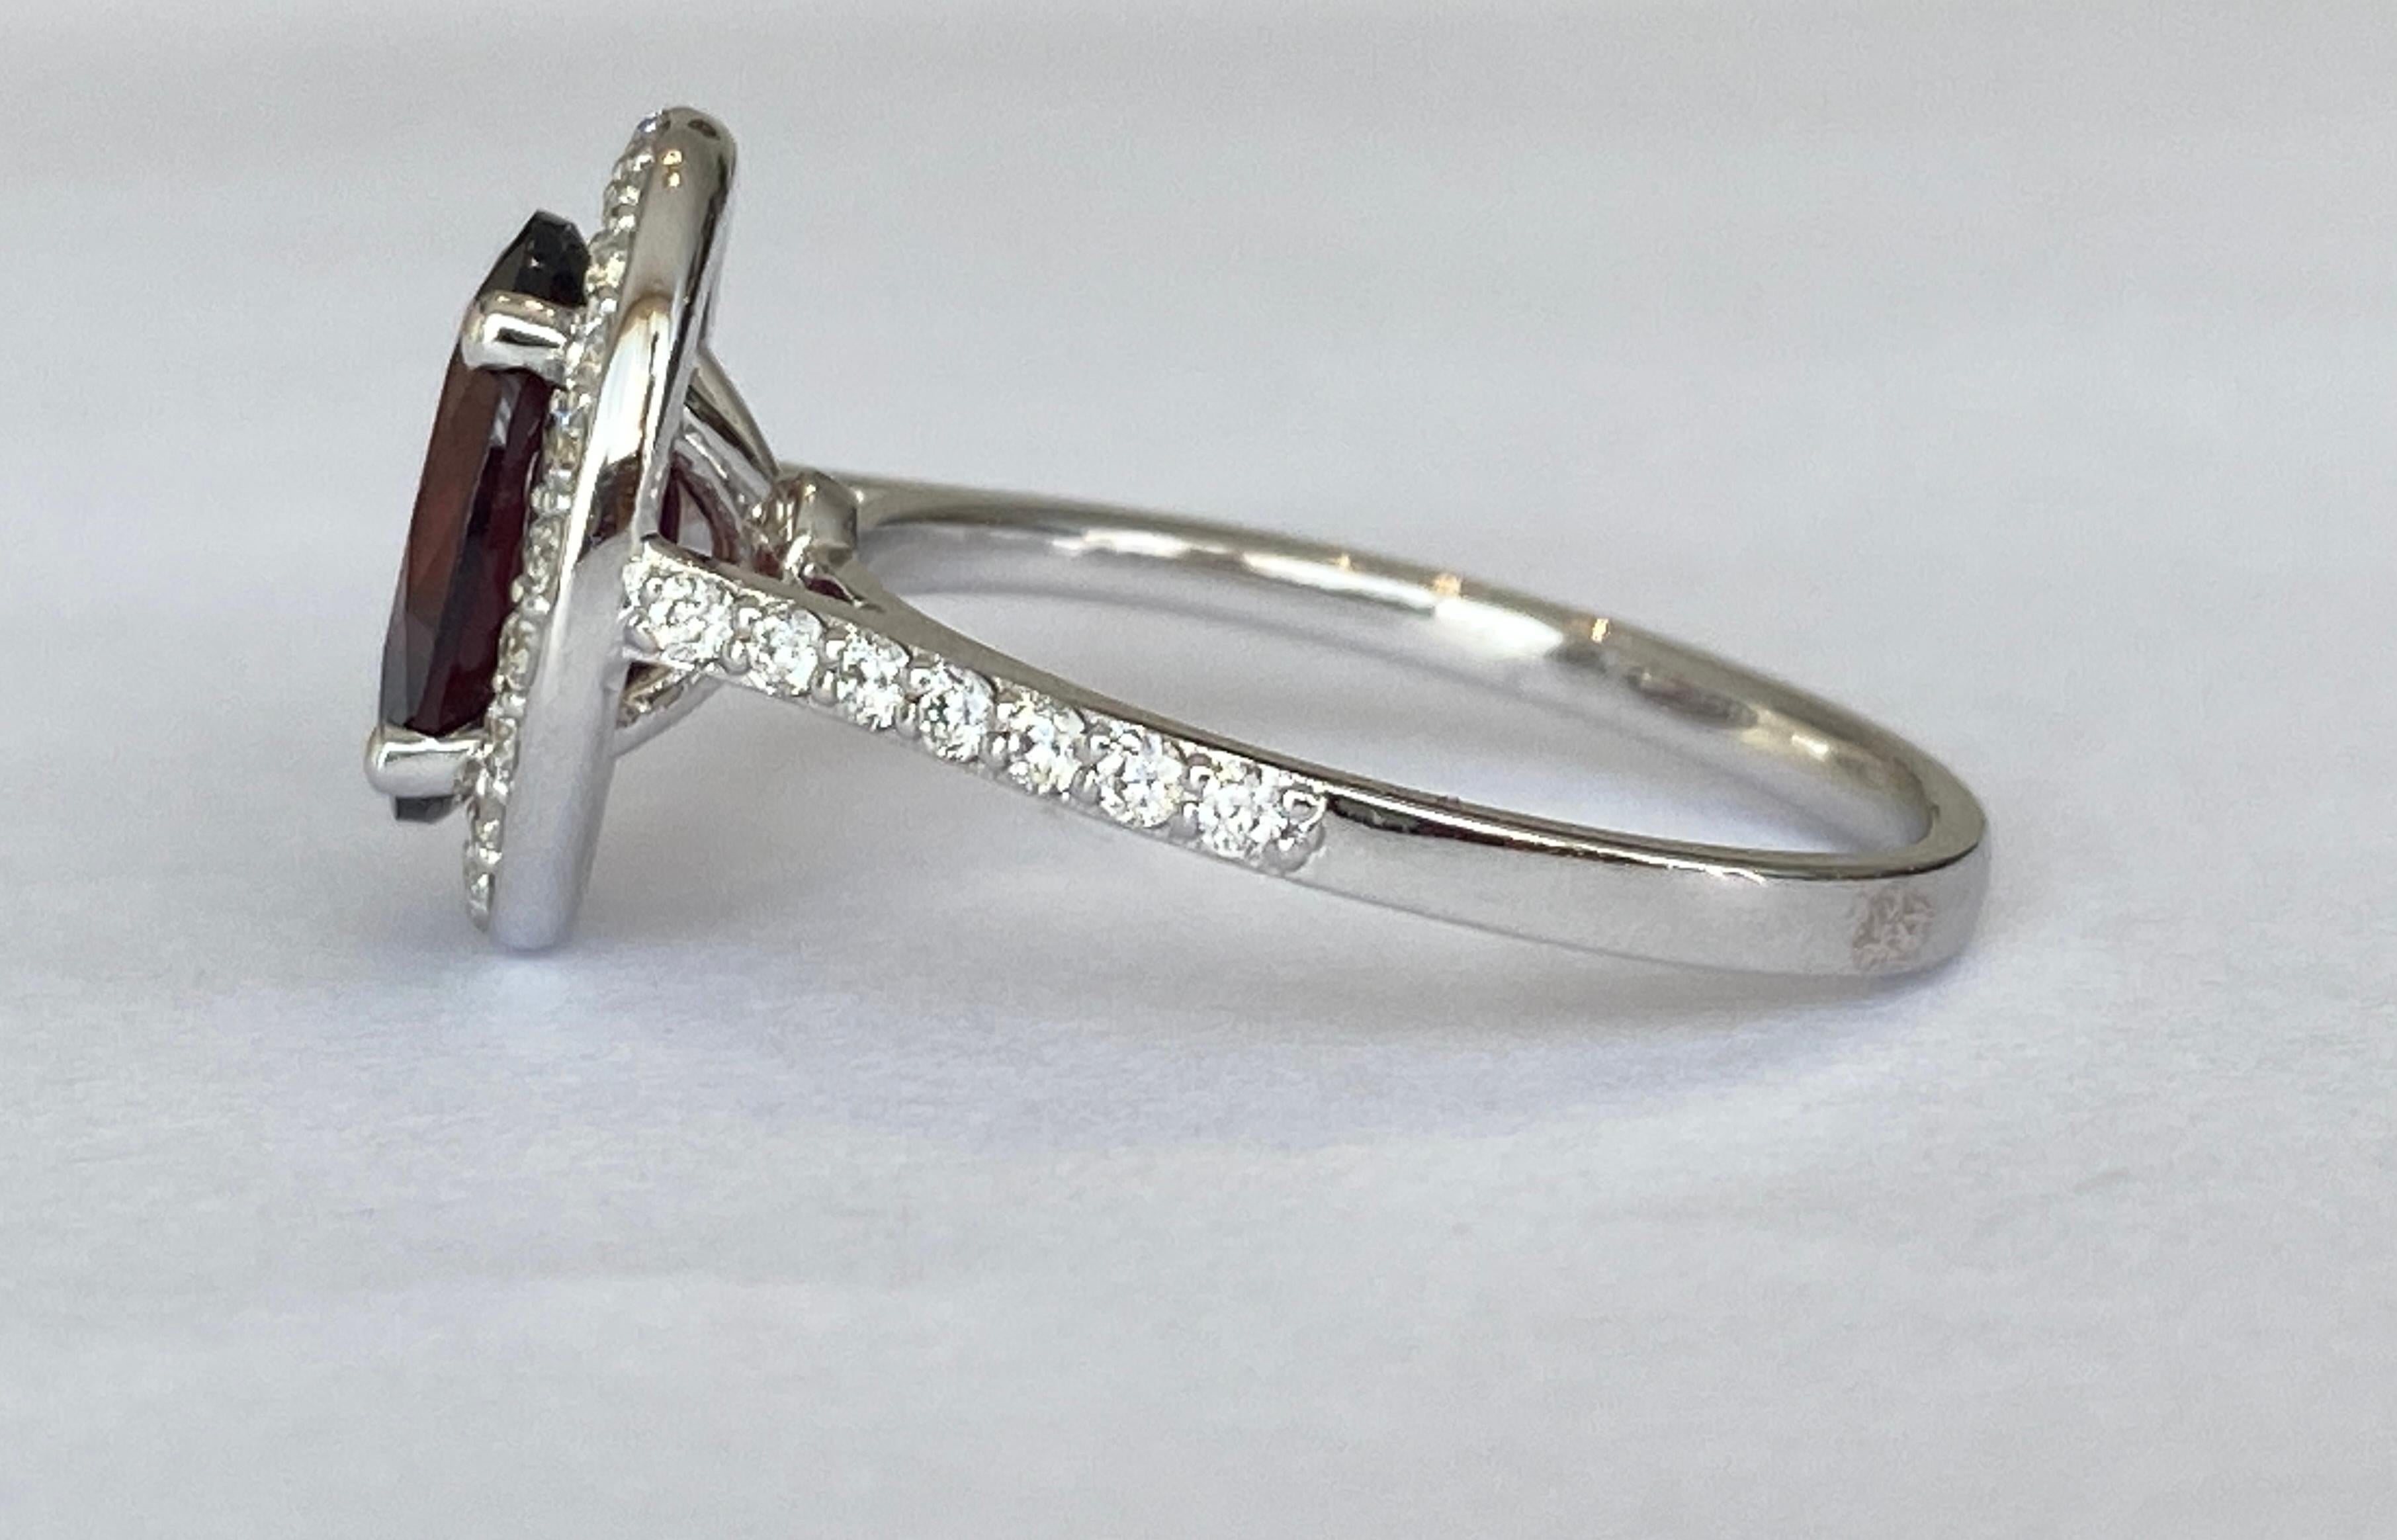 ALGT Certified 18 Carat White Gold 1.90 Carat Tourmaline Diamond Cocktail Ring For Sale 2